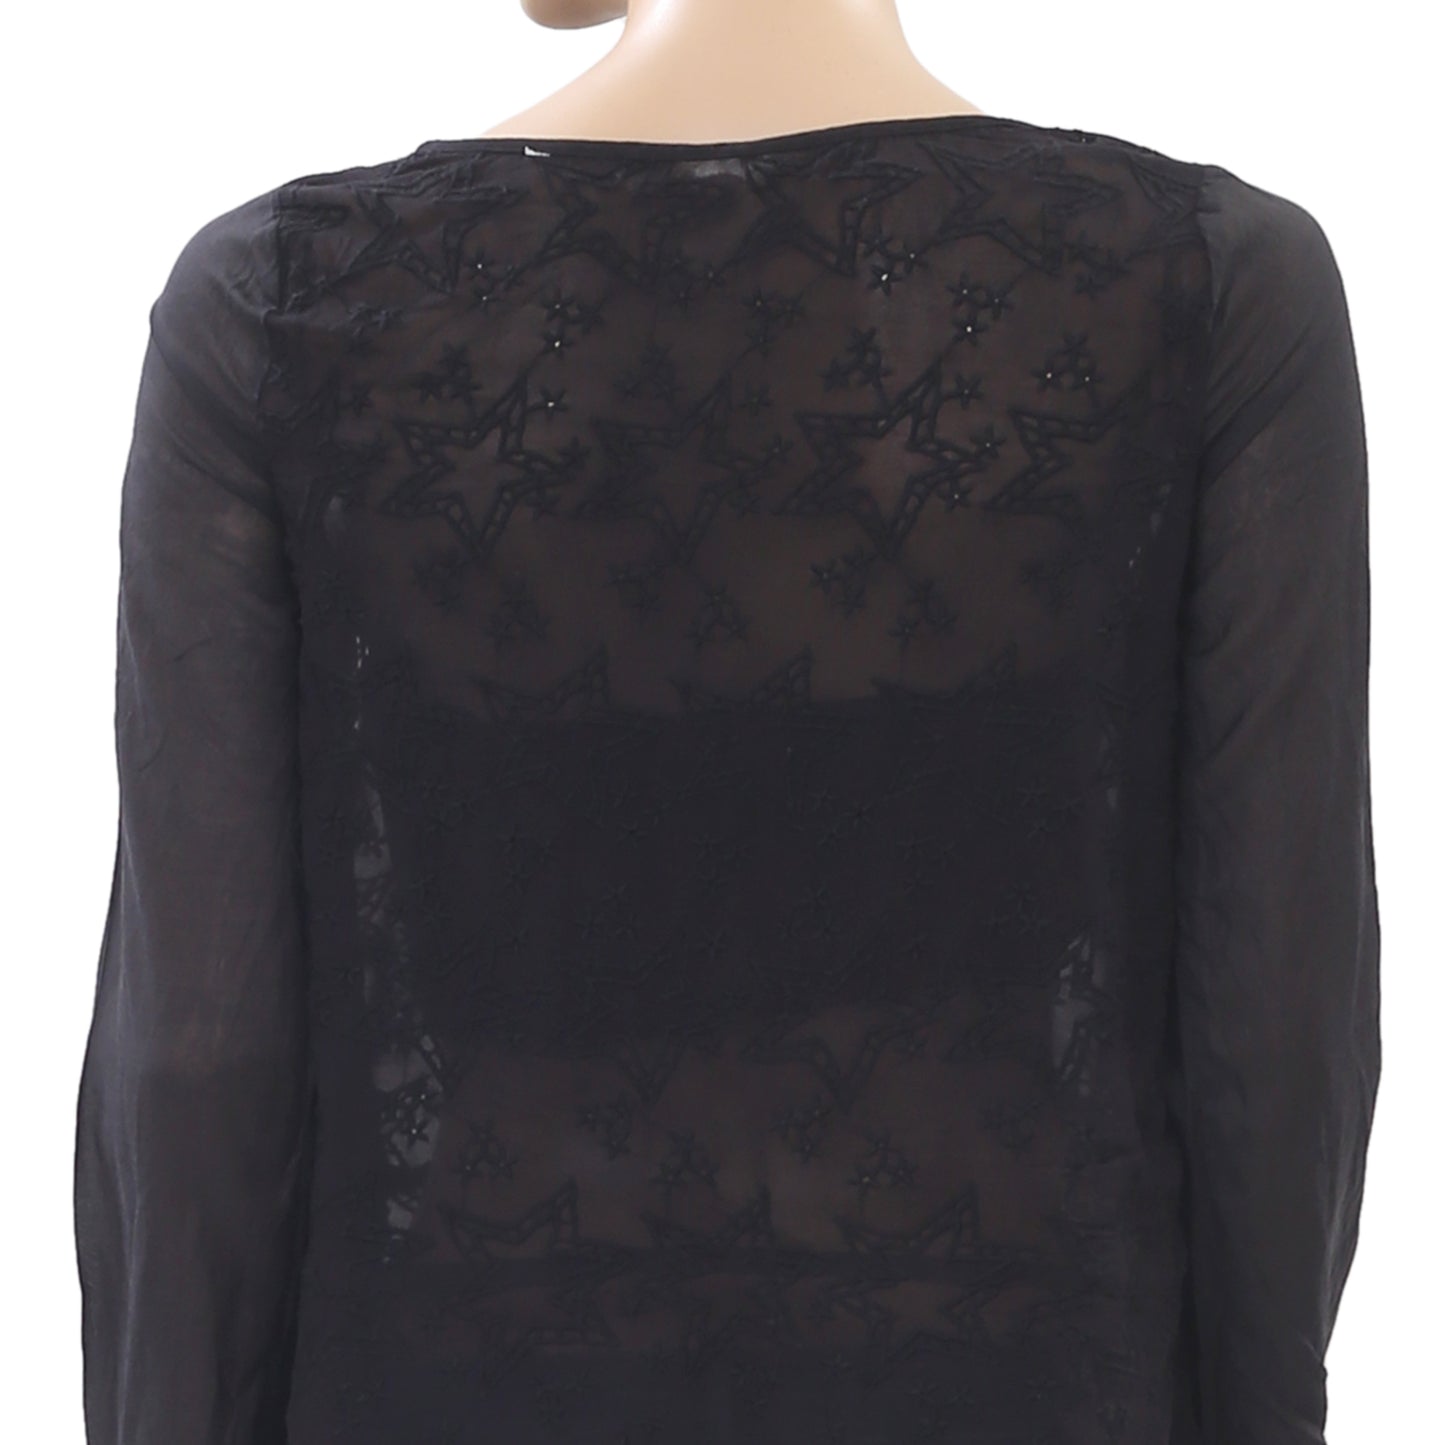 Odd Molly Anthropologie Embroidered Black Blouse Top